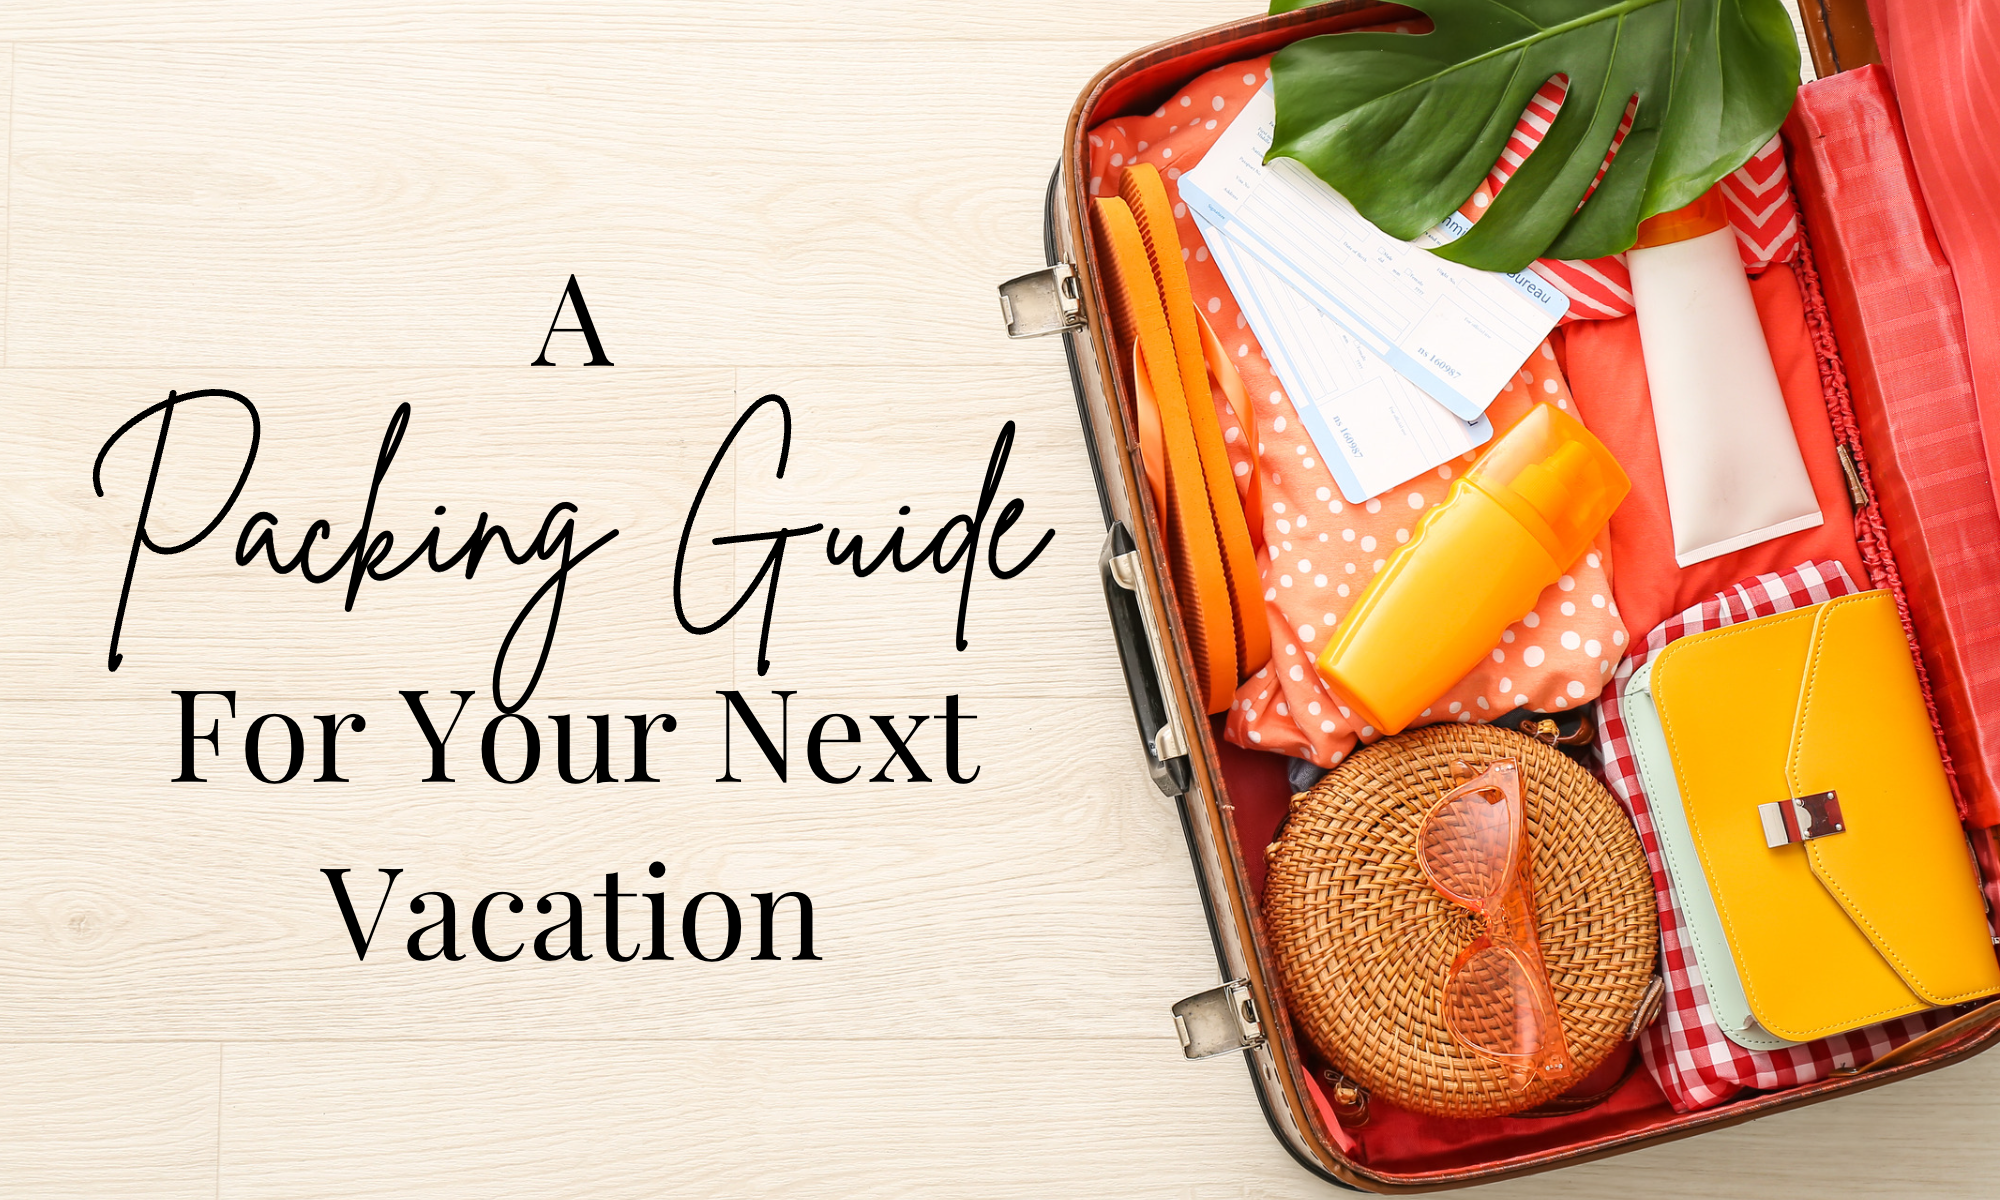 Light Wood Background with a suitcase showing items packed with a green leaf and wording saying A Packing Guide for your Next Vacation